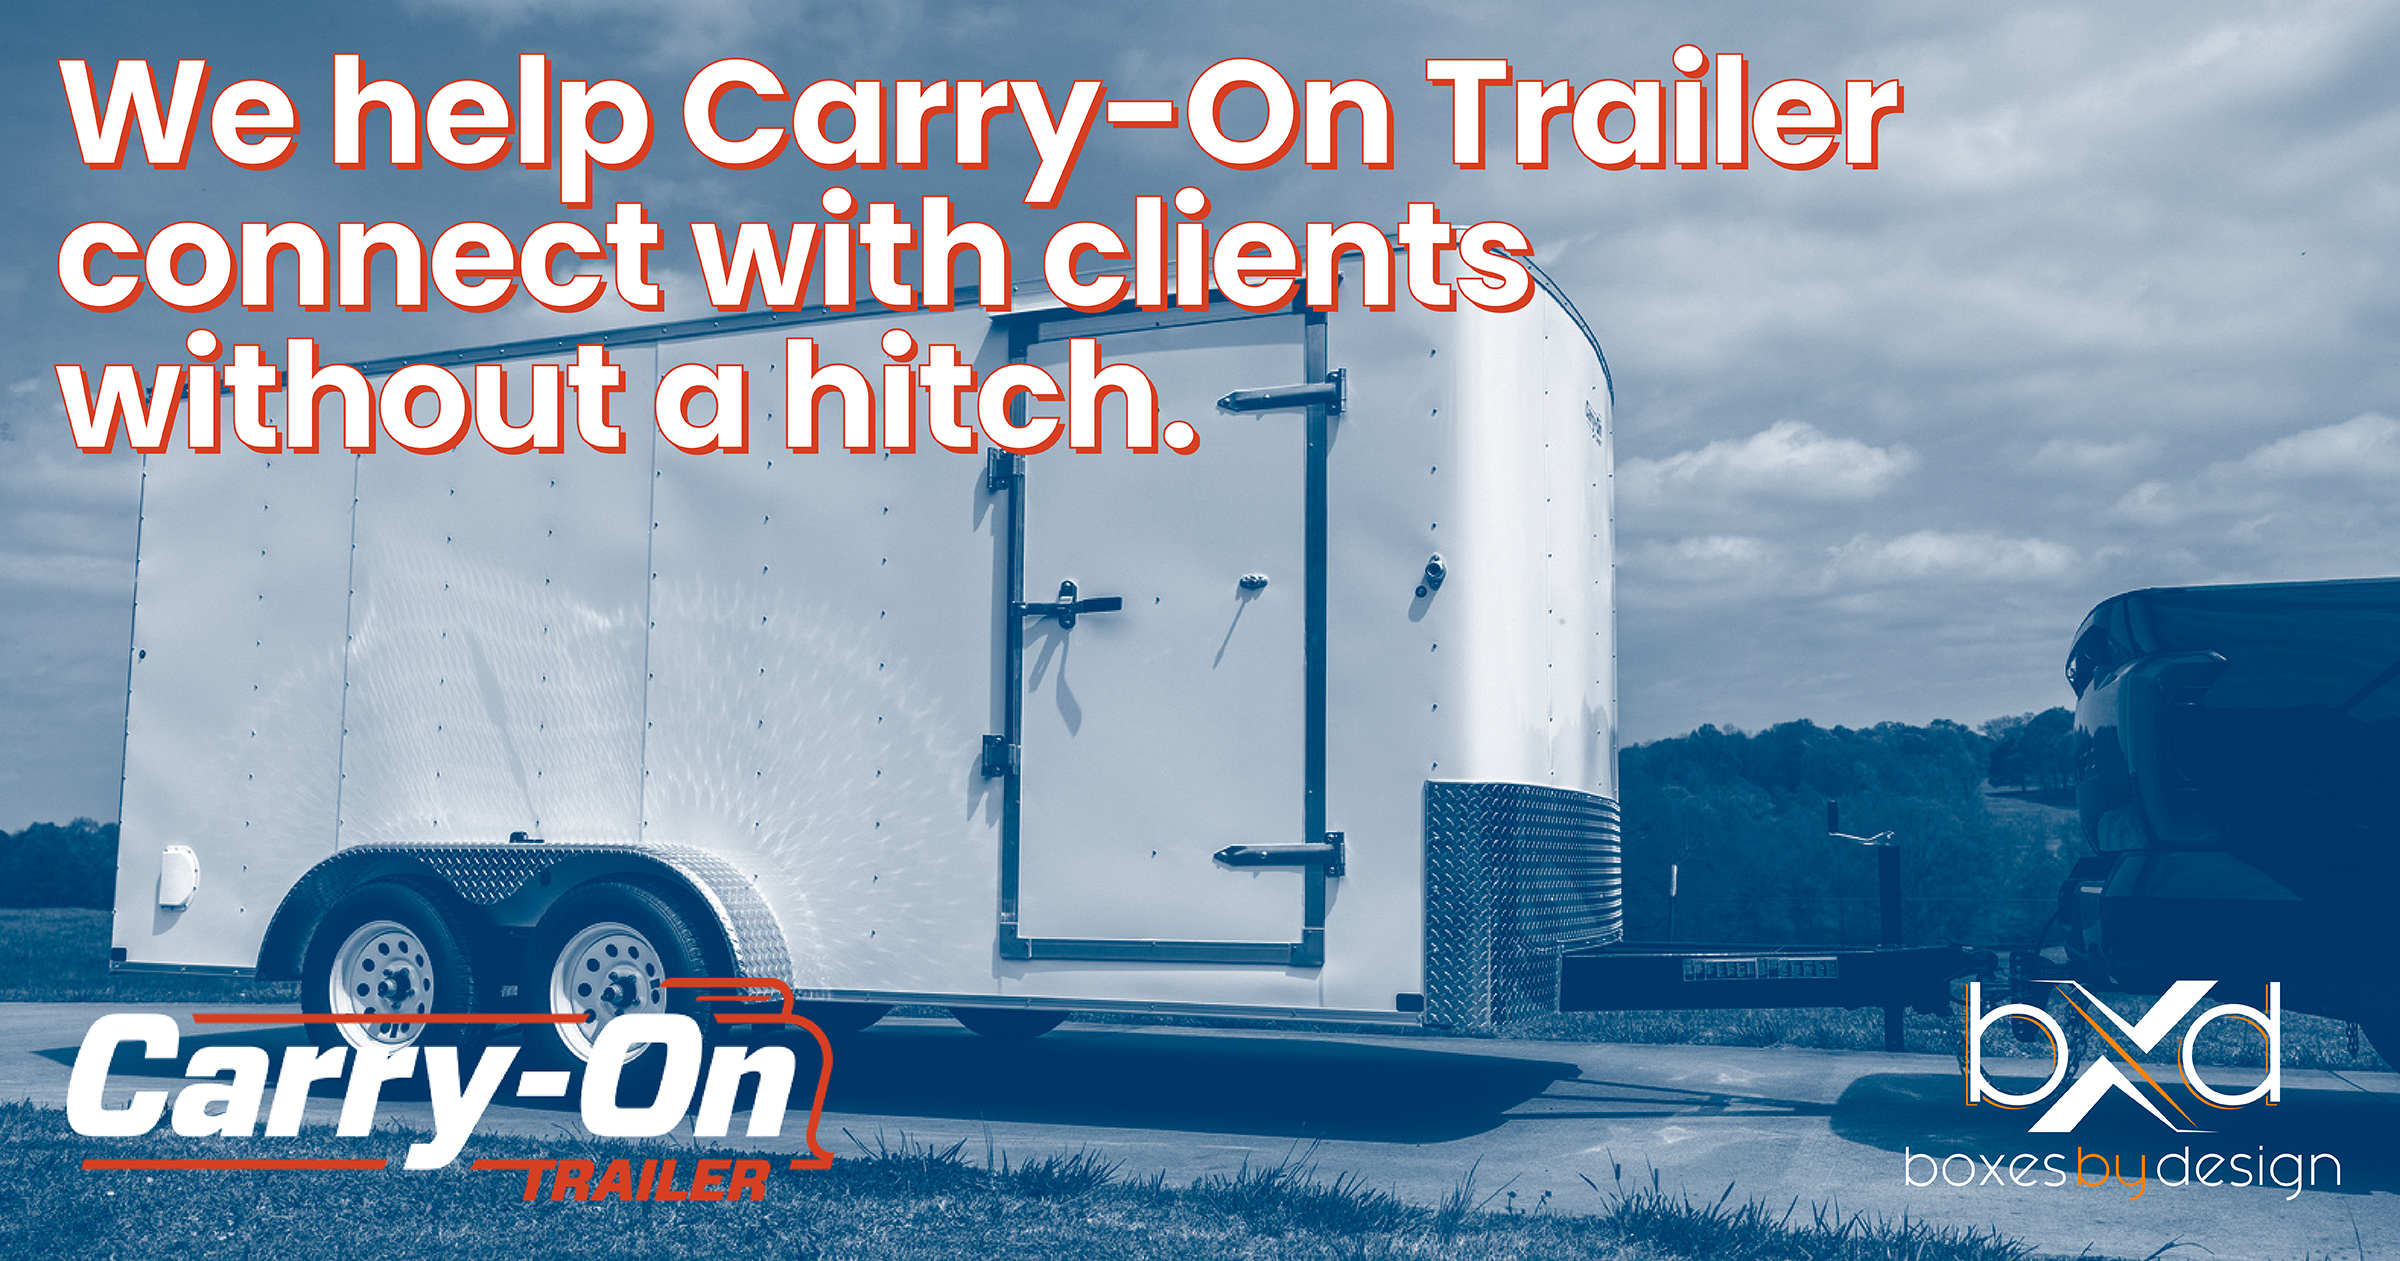 Custom Corrugated Boxes for Carry-On Trailer